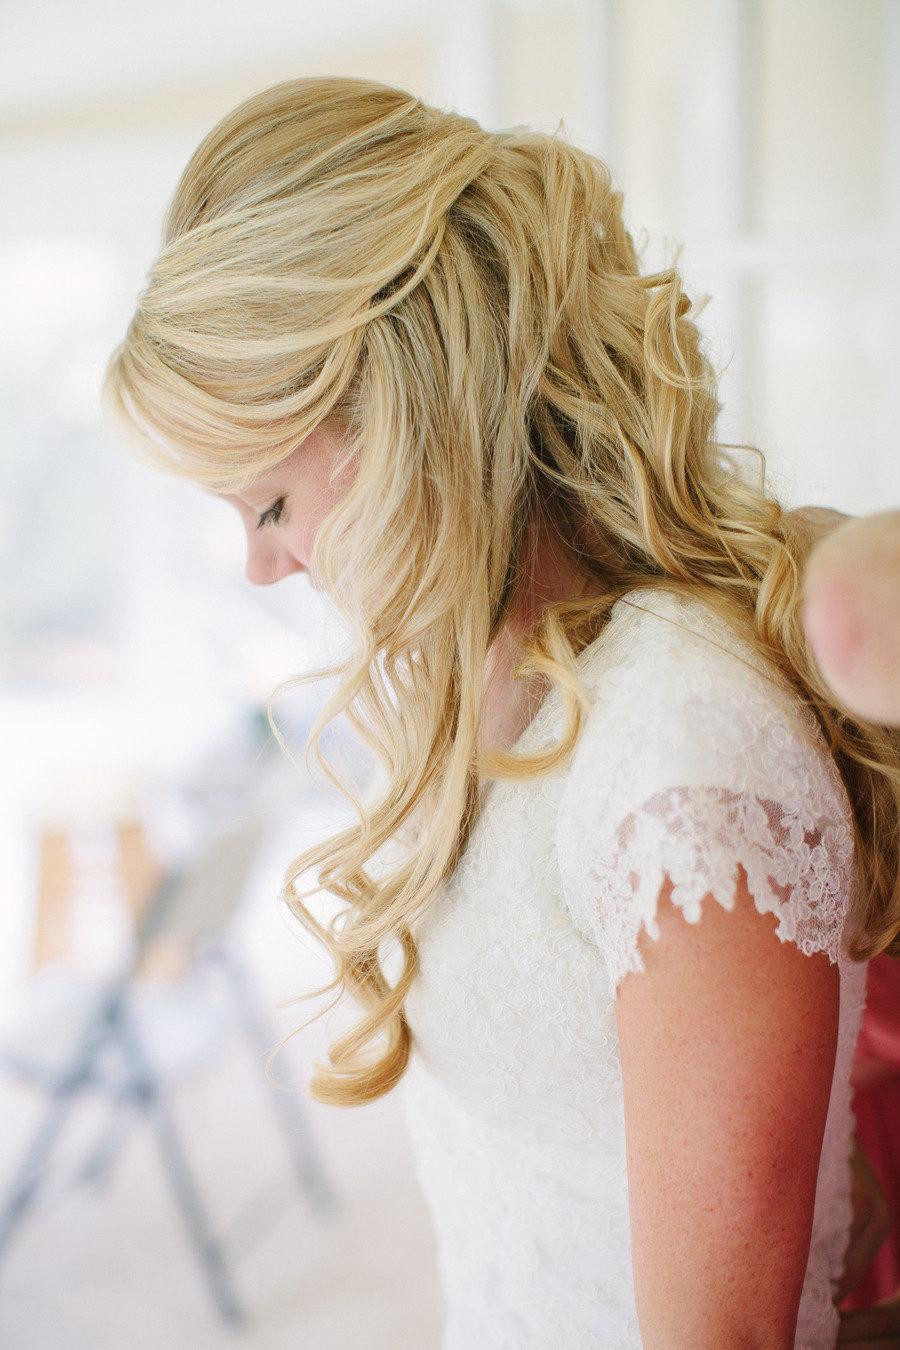 Hairstyles For Your Wedding Day
 Pretty Wedding Hairstyles You Can Try For Your Big Day